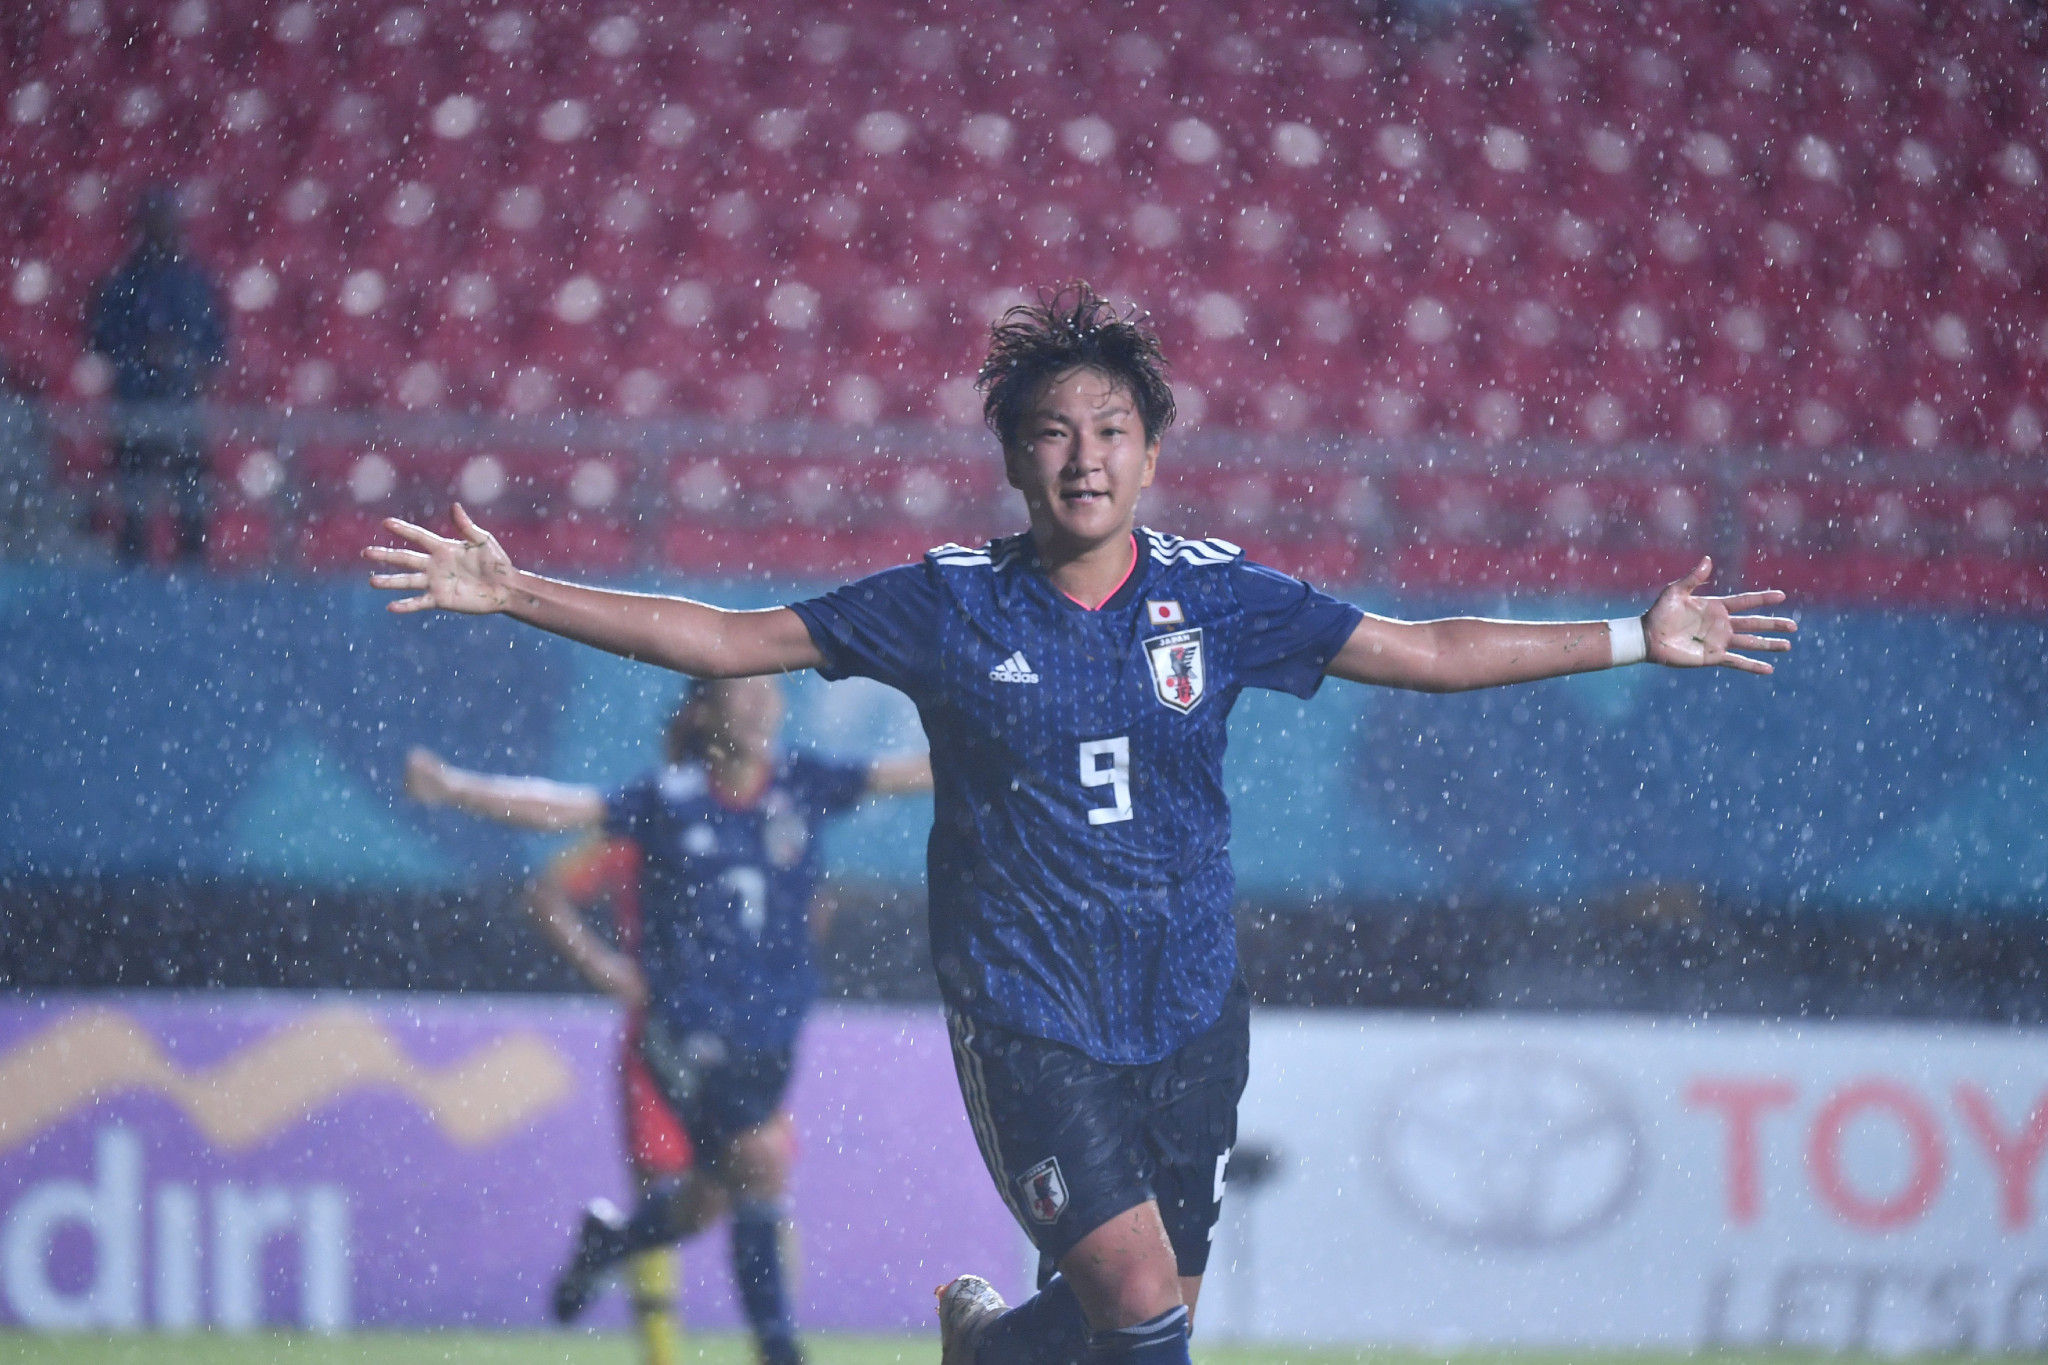 Substitute Yuika Sugasawa scored a last-minute winner as Japan beat China 1-0 to re-gain the Asian Games women’s football title today ©Getty Images